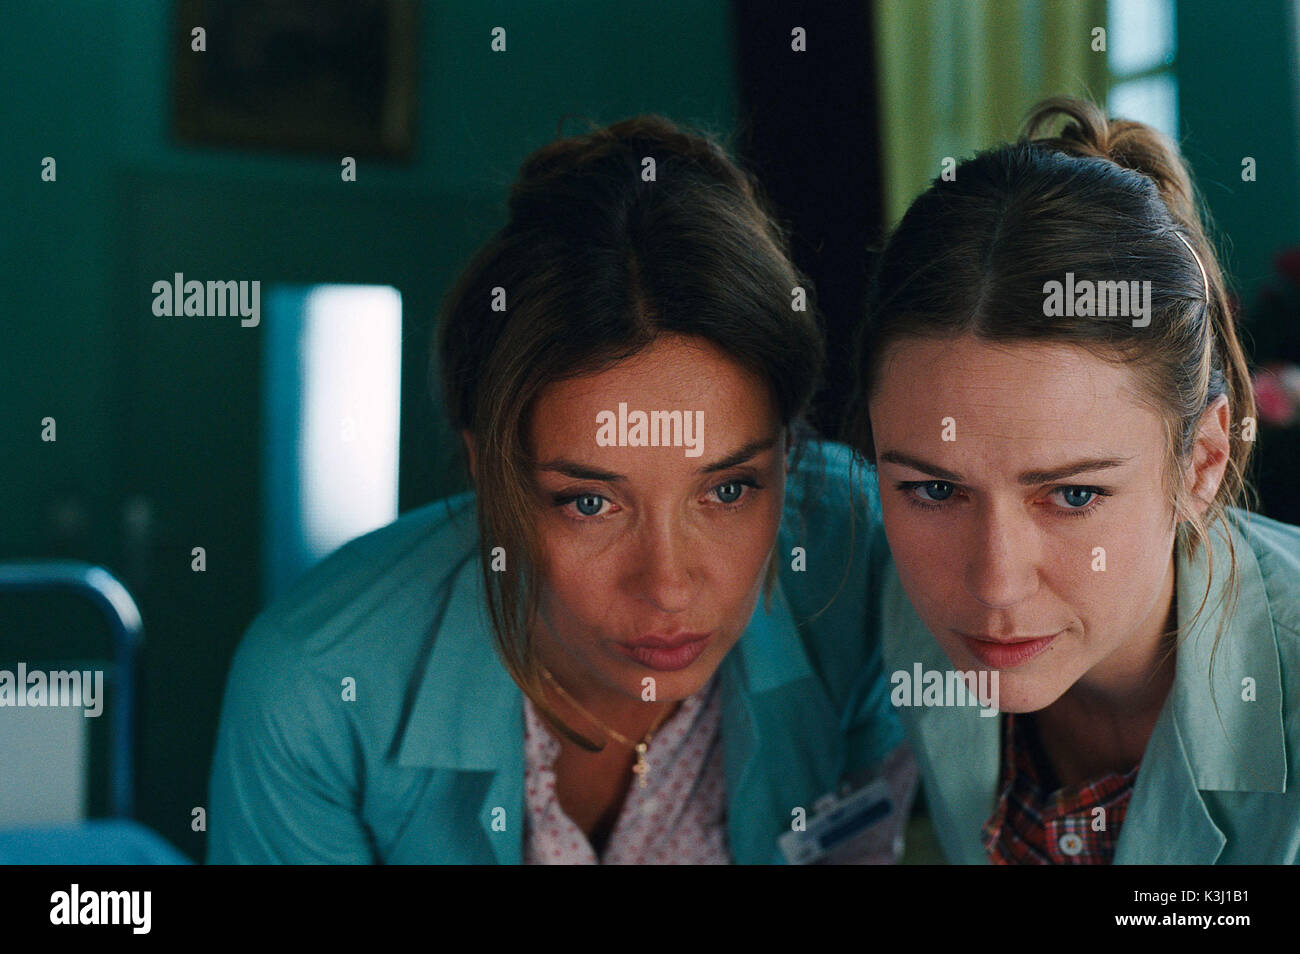 Olatz Lopez Garmendia as Marie Lopez and Marie-Josee Croze as Henriette Roi (right) in The Diving Bell and the Butterfly, directed by Julian Schnabel, produced by Kathleen Kennedy and Jon Kilik. LE SCAPHANDRE ET LE PAPILLON  aka THE DIVING BELL AND THE BUTTERFLY OLATZ LOPEZ GARMENDIA, MARIE-JOSEE CROZE Olatz Lopez Garmendia as Marie Lopez (left) and Marie-Jose&#x9803;roze as Henriette Roi (right) in The Diving Bell and the Bu     Date: 2007 Stock Photo